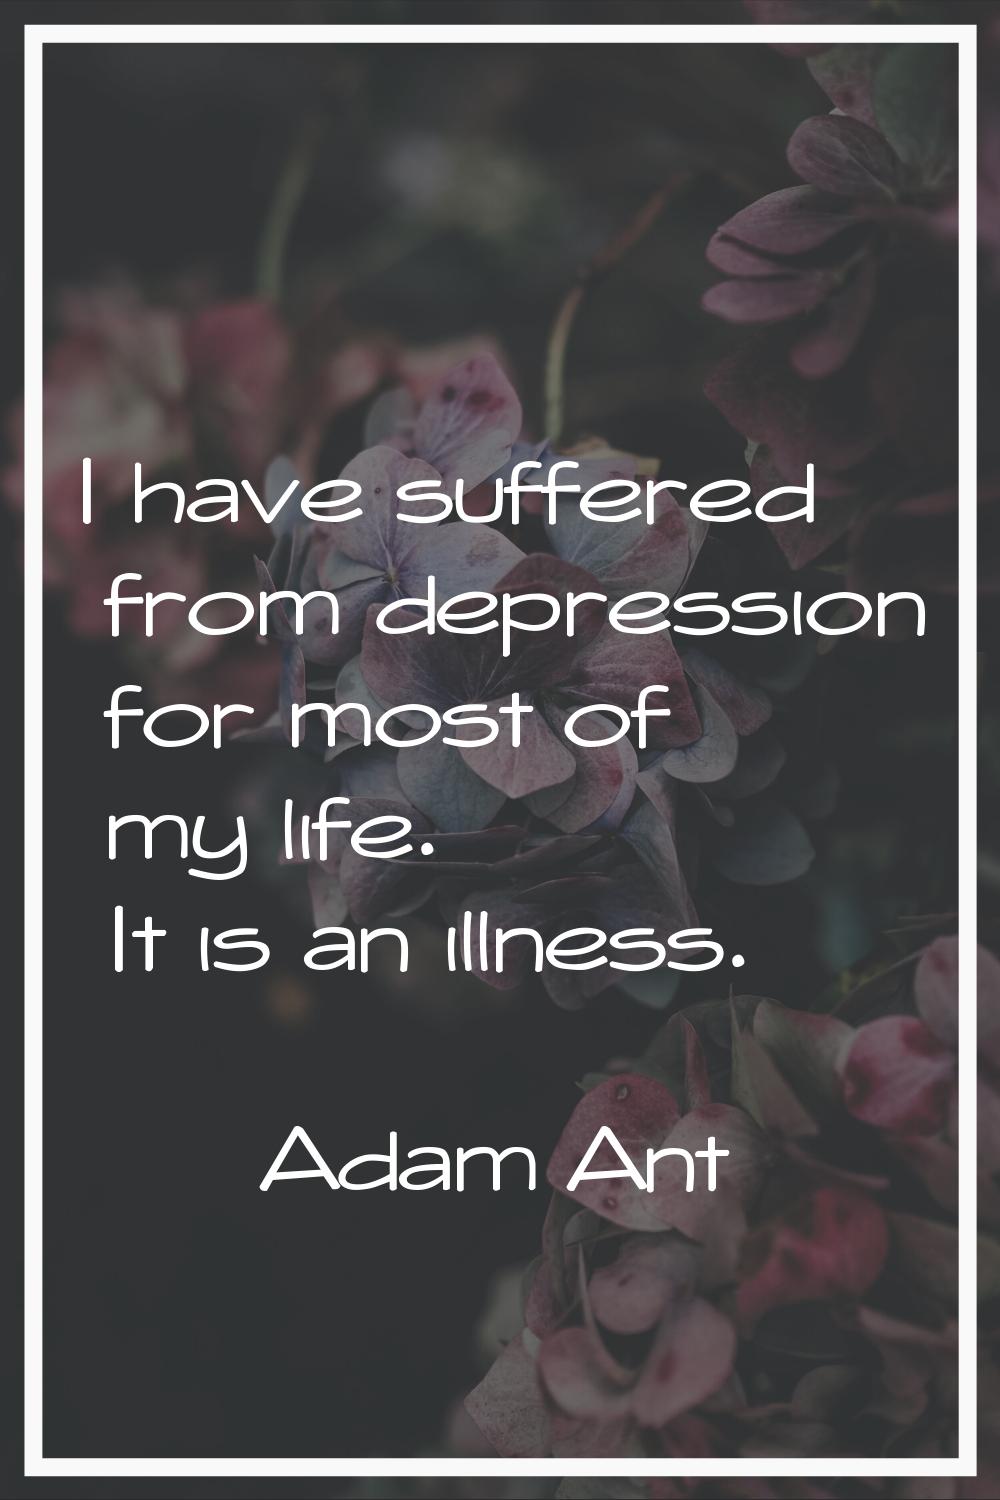 I have suffered from depression for most of my life. It is an illness.